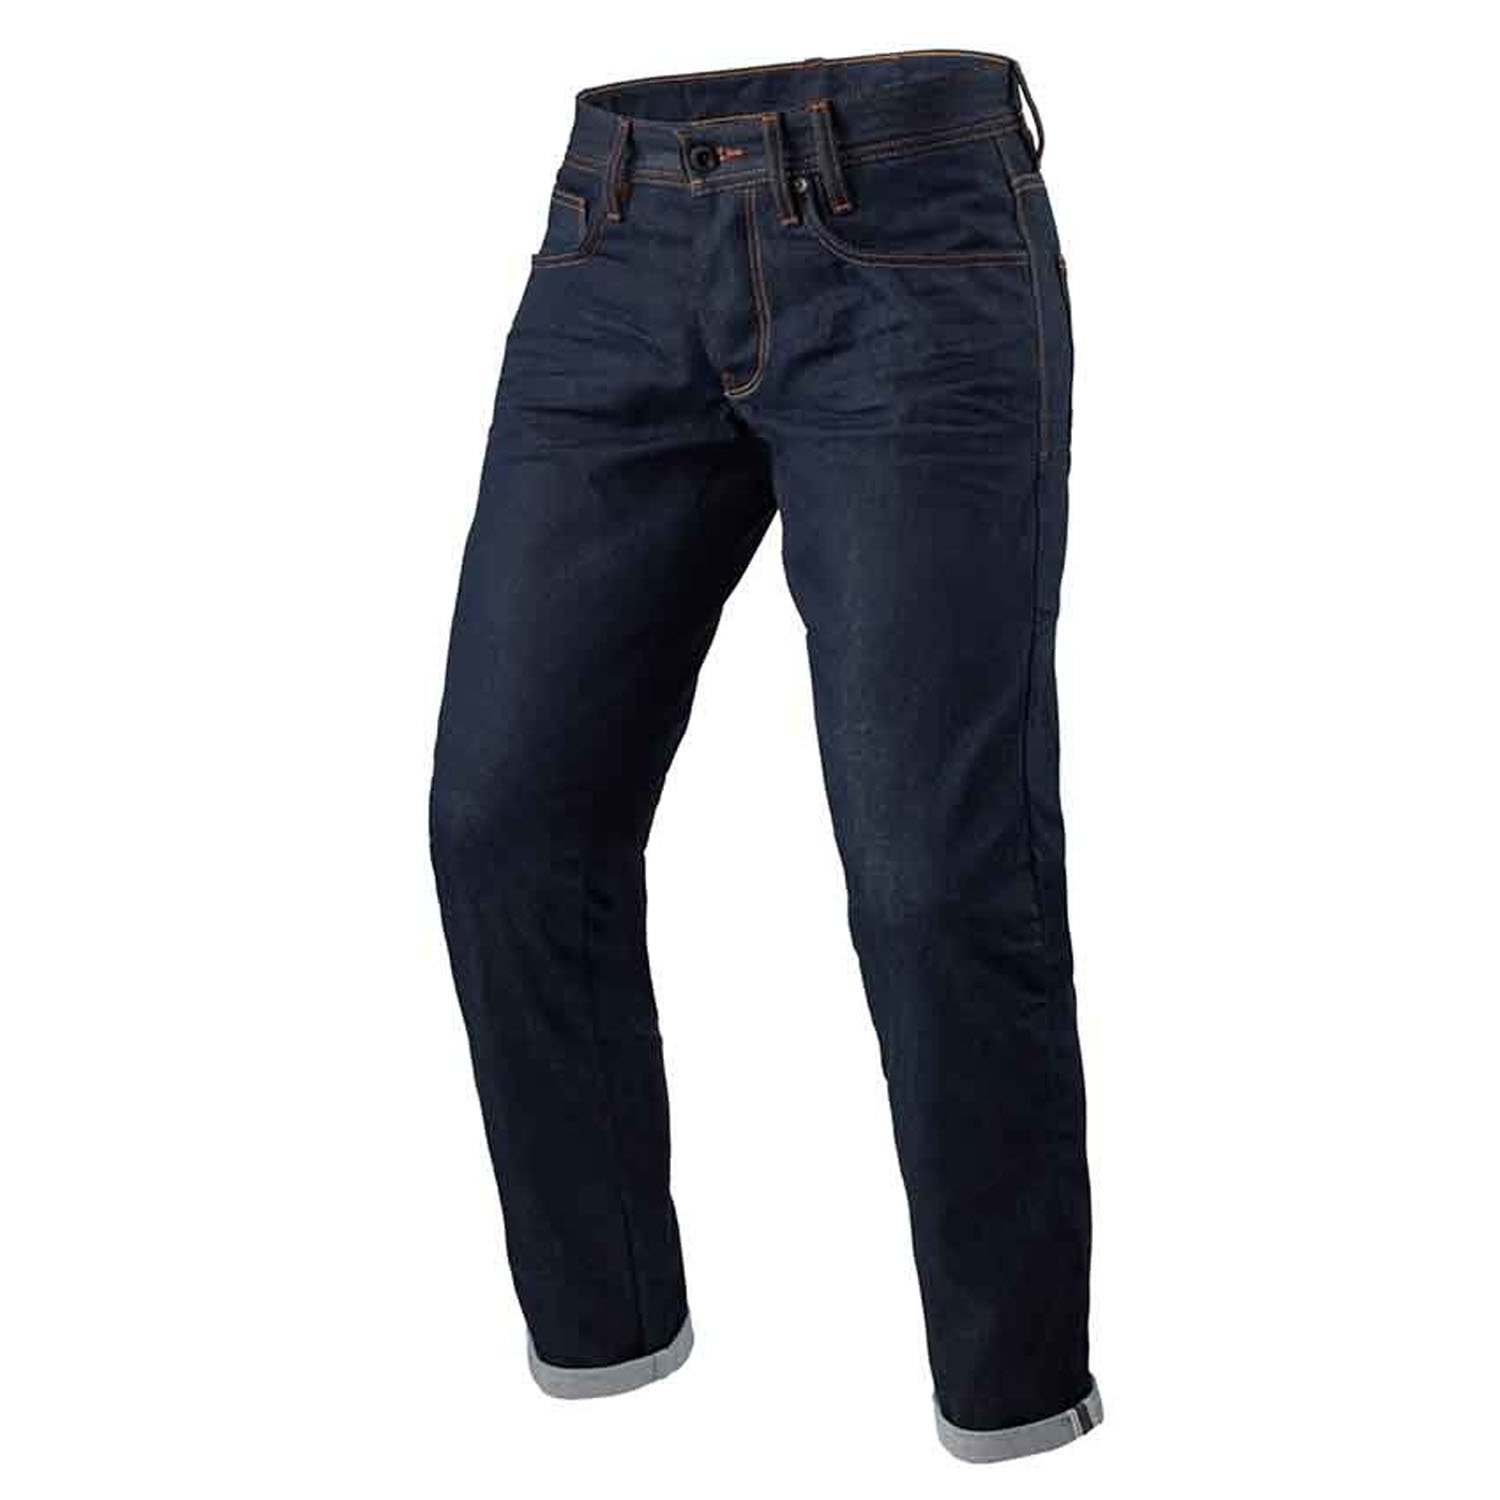 Image of REV'IT! Jeans Lewis Selvedge TF Dark Blue L36 Motorcycle Pants Size L36/W32 ID 8700001358118